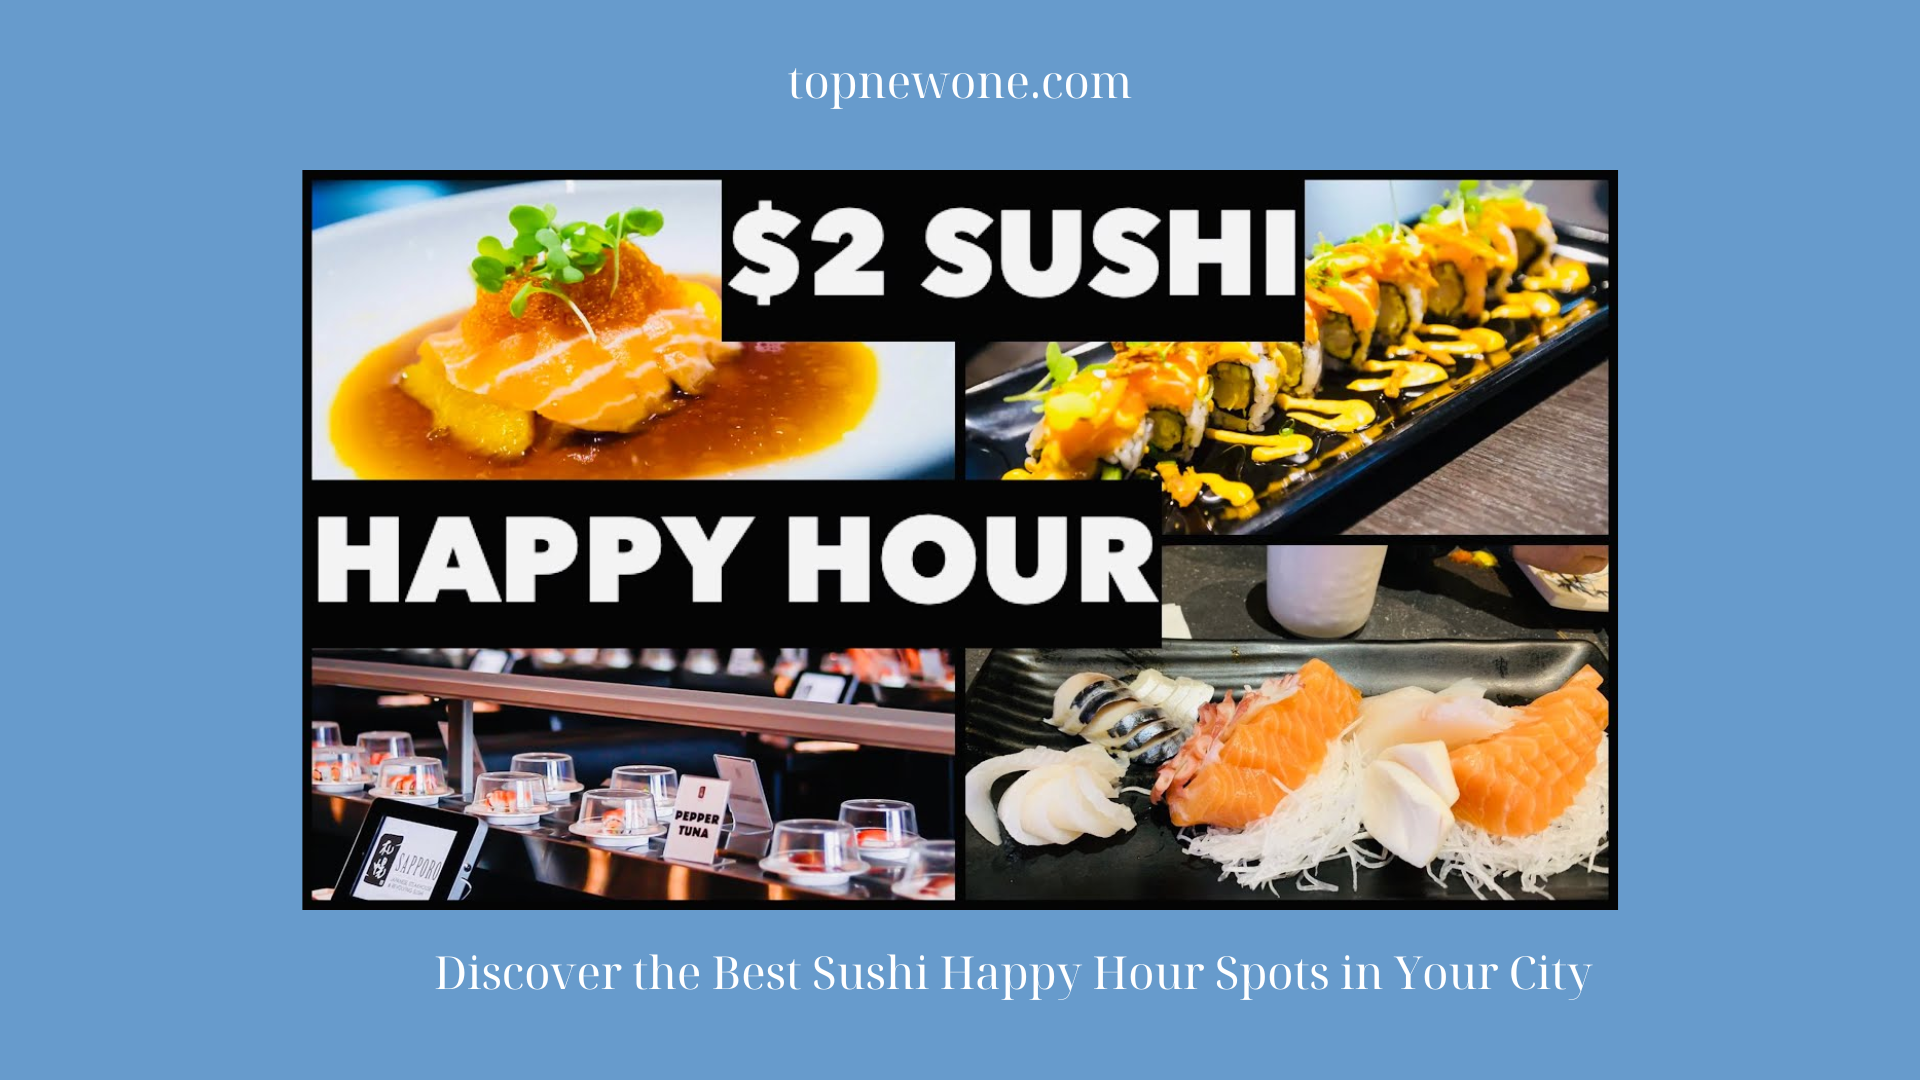 Discover the Best Sushi Happy Hour Spots in Your City